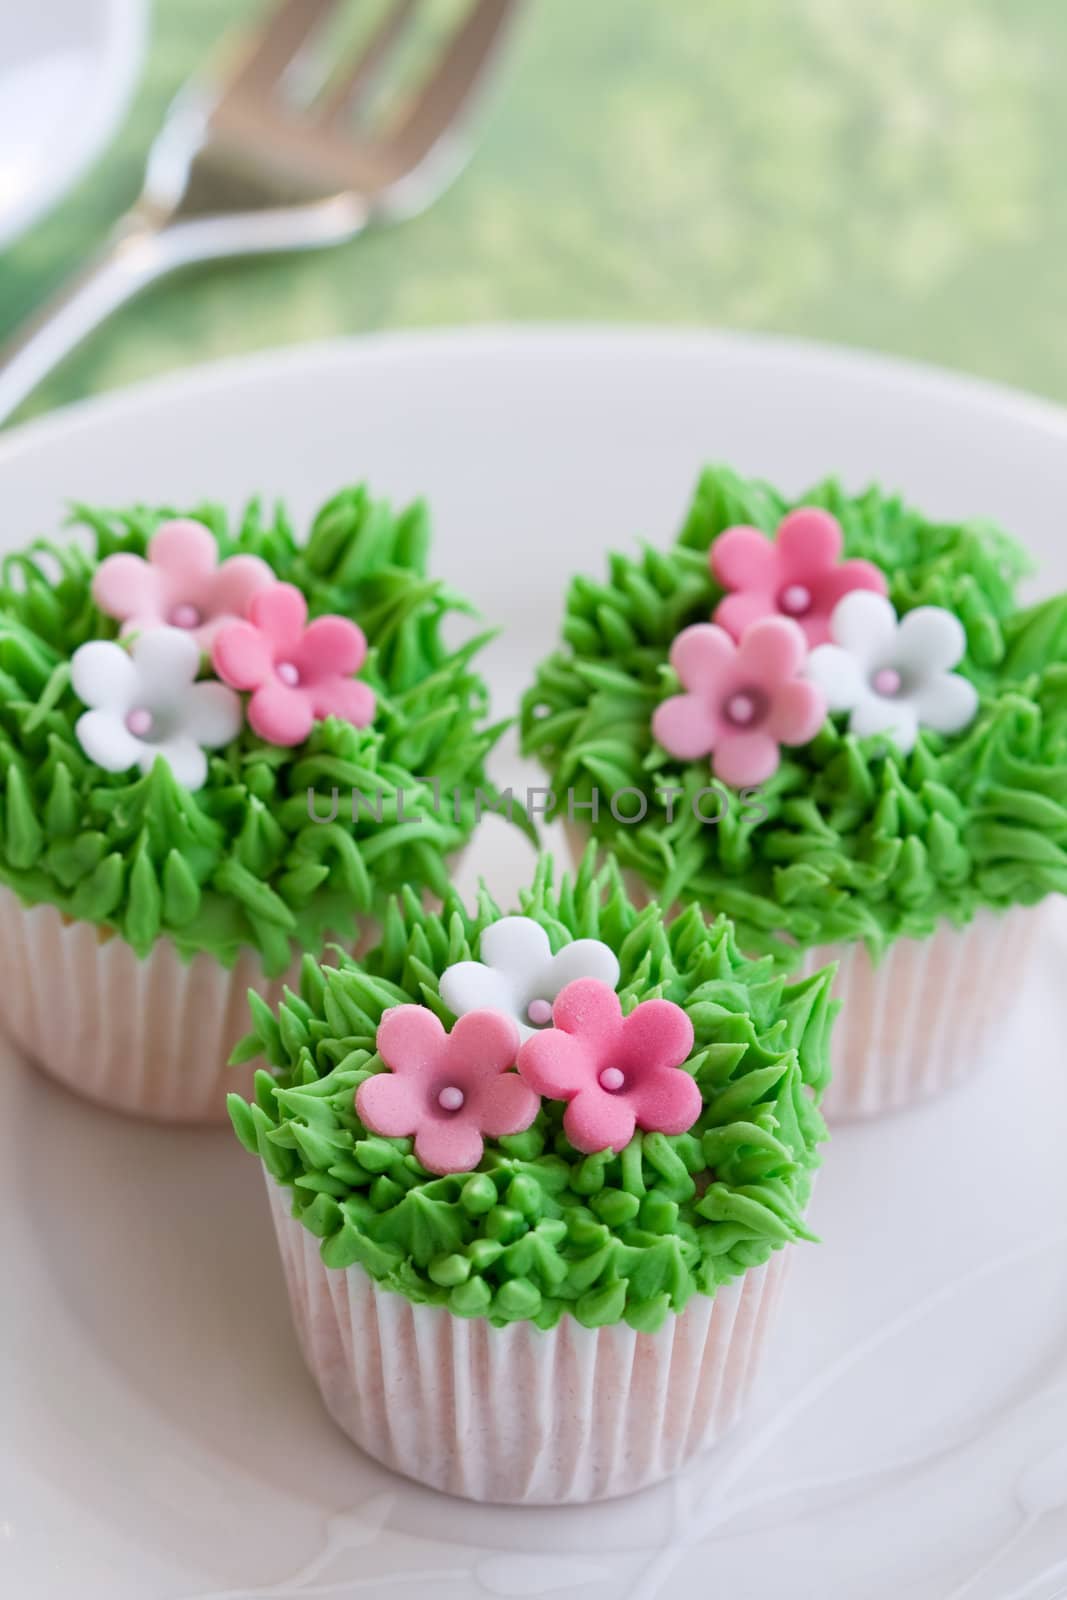 Mini cupcakes decorated with frosted grass and pink flowers